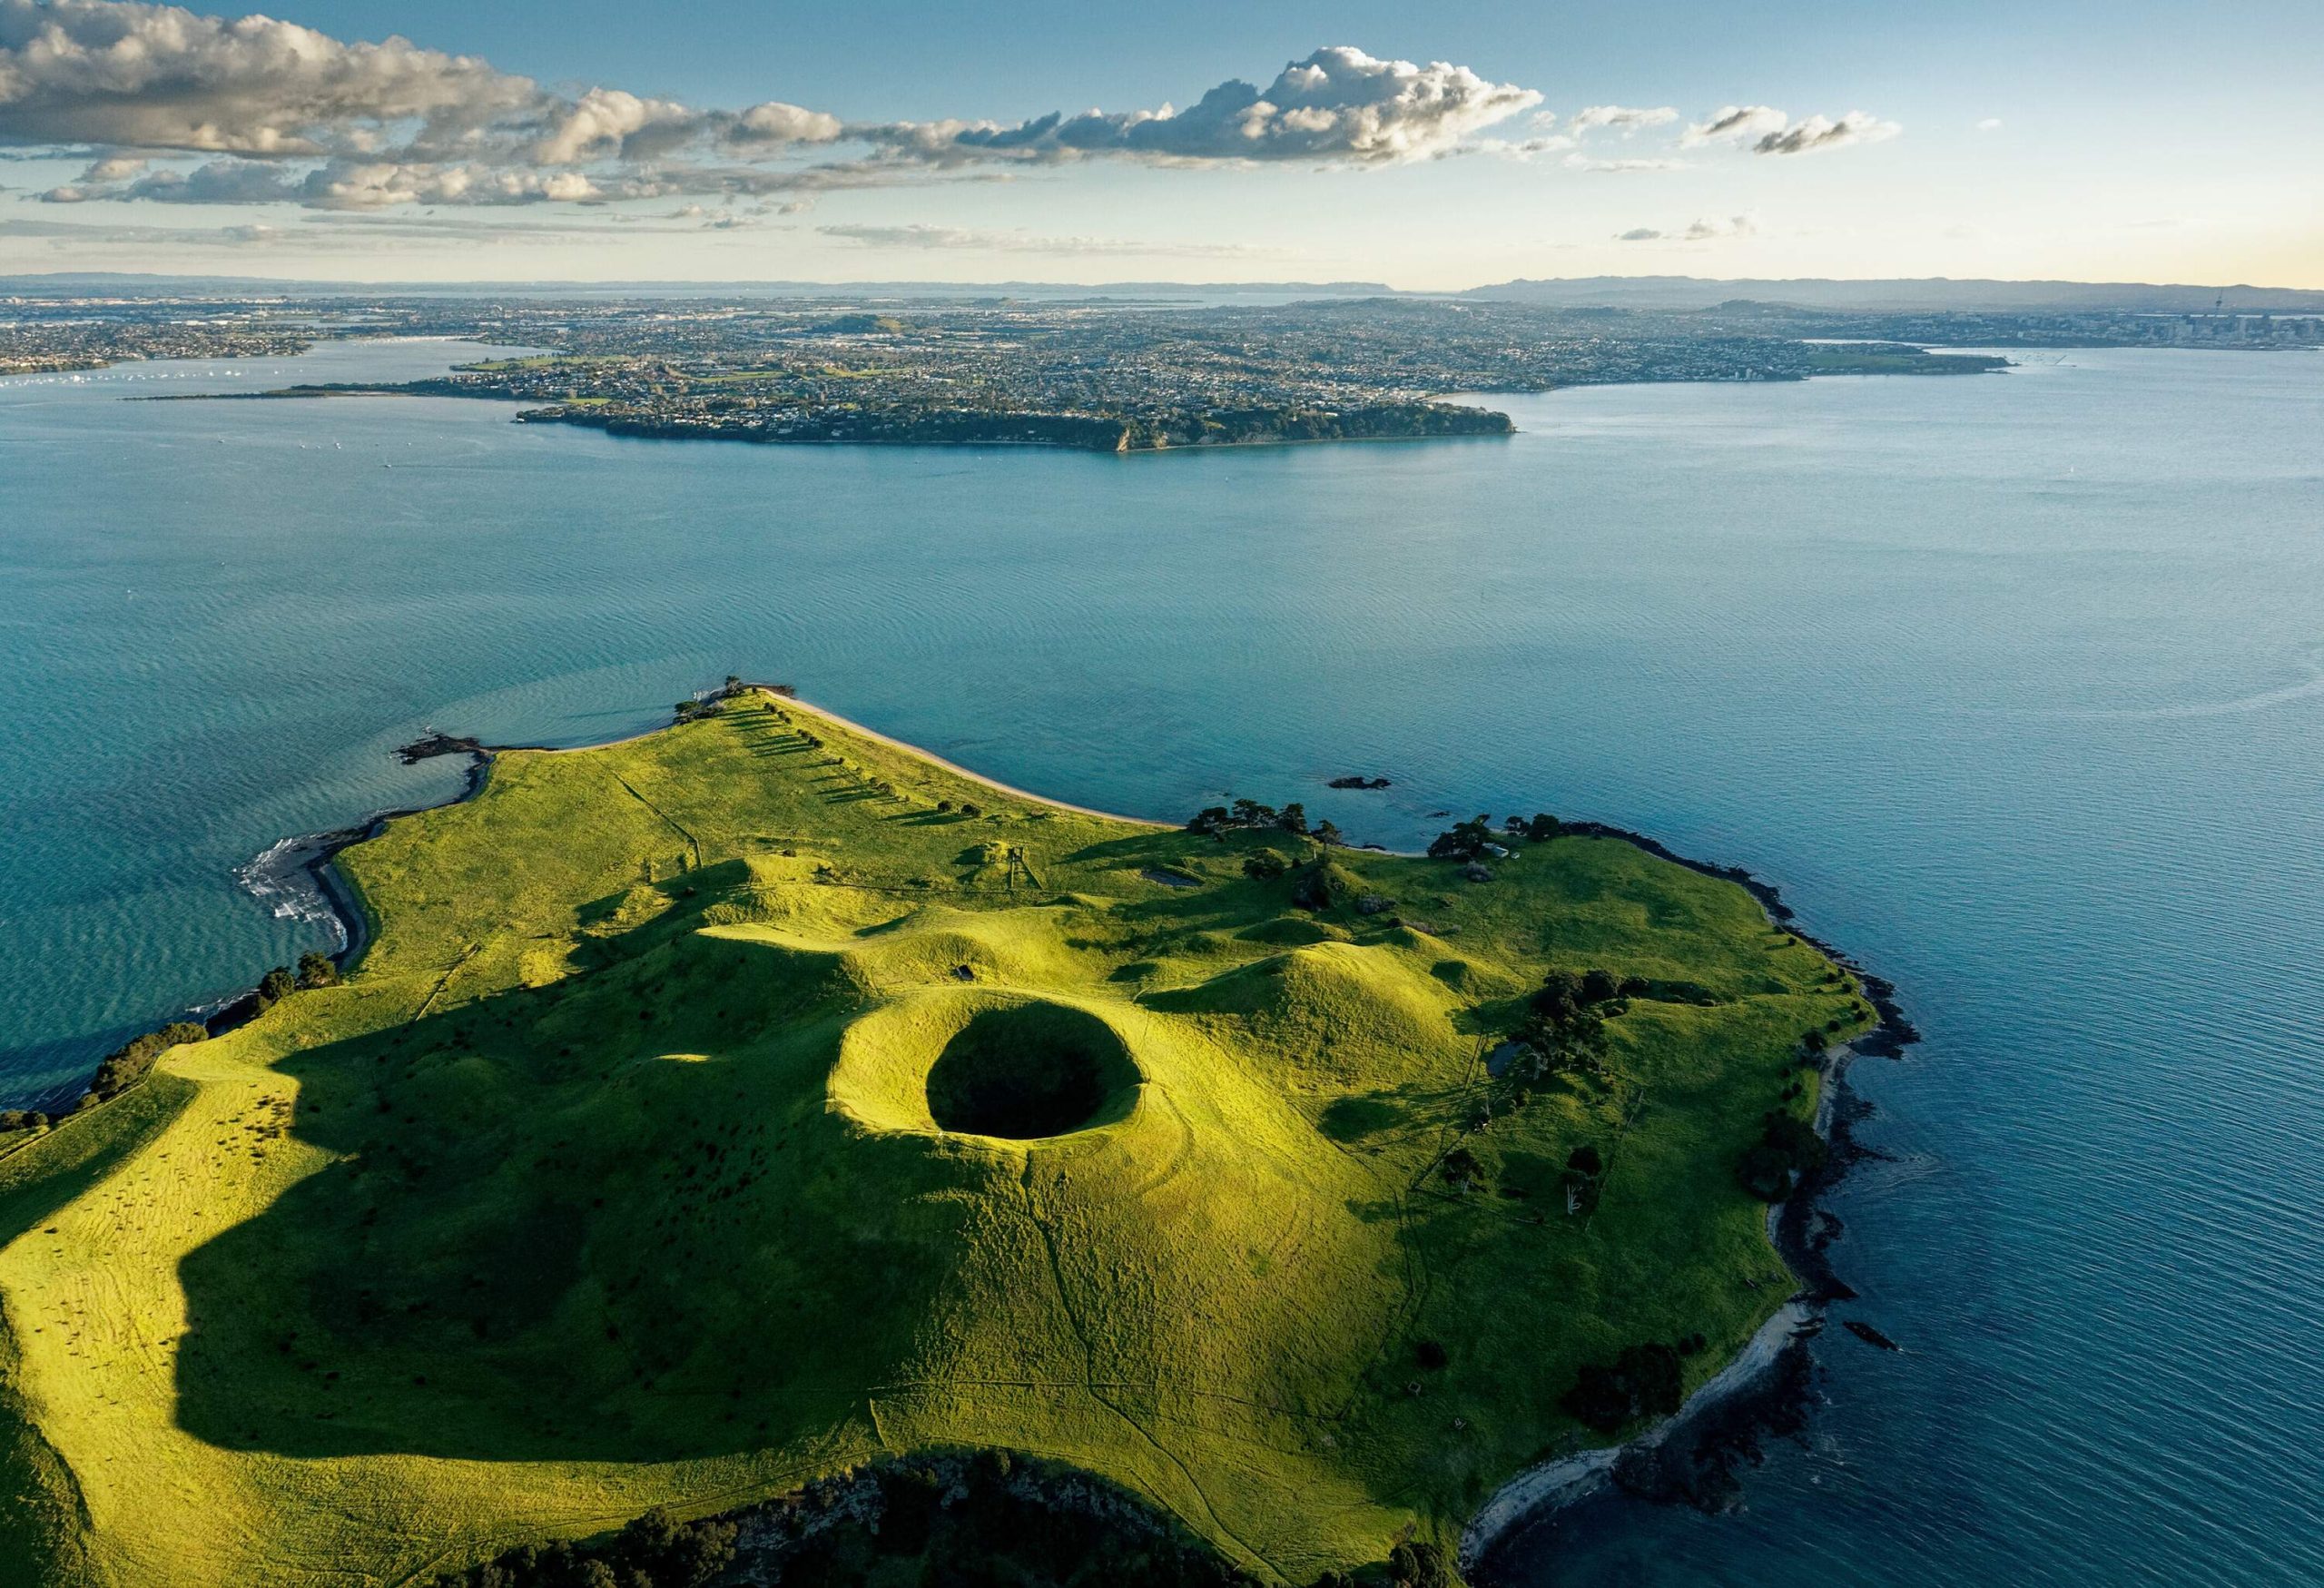 A spectacular sunlit conical volcano with a deep crater covered by lush green grass emerges on the sea surface.